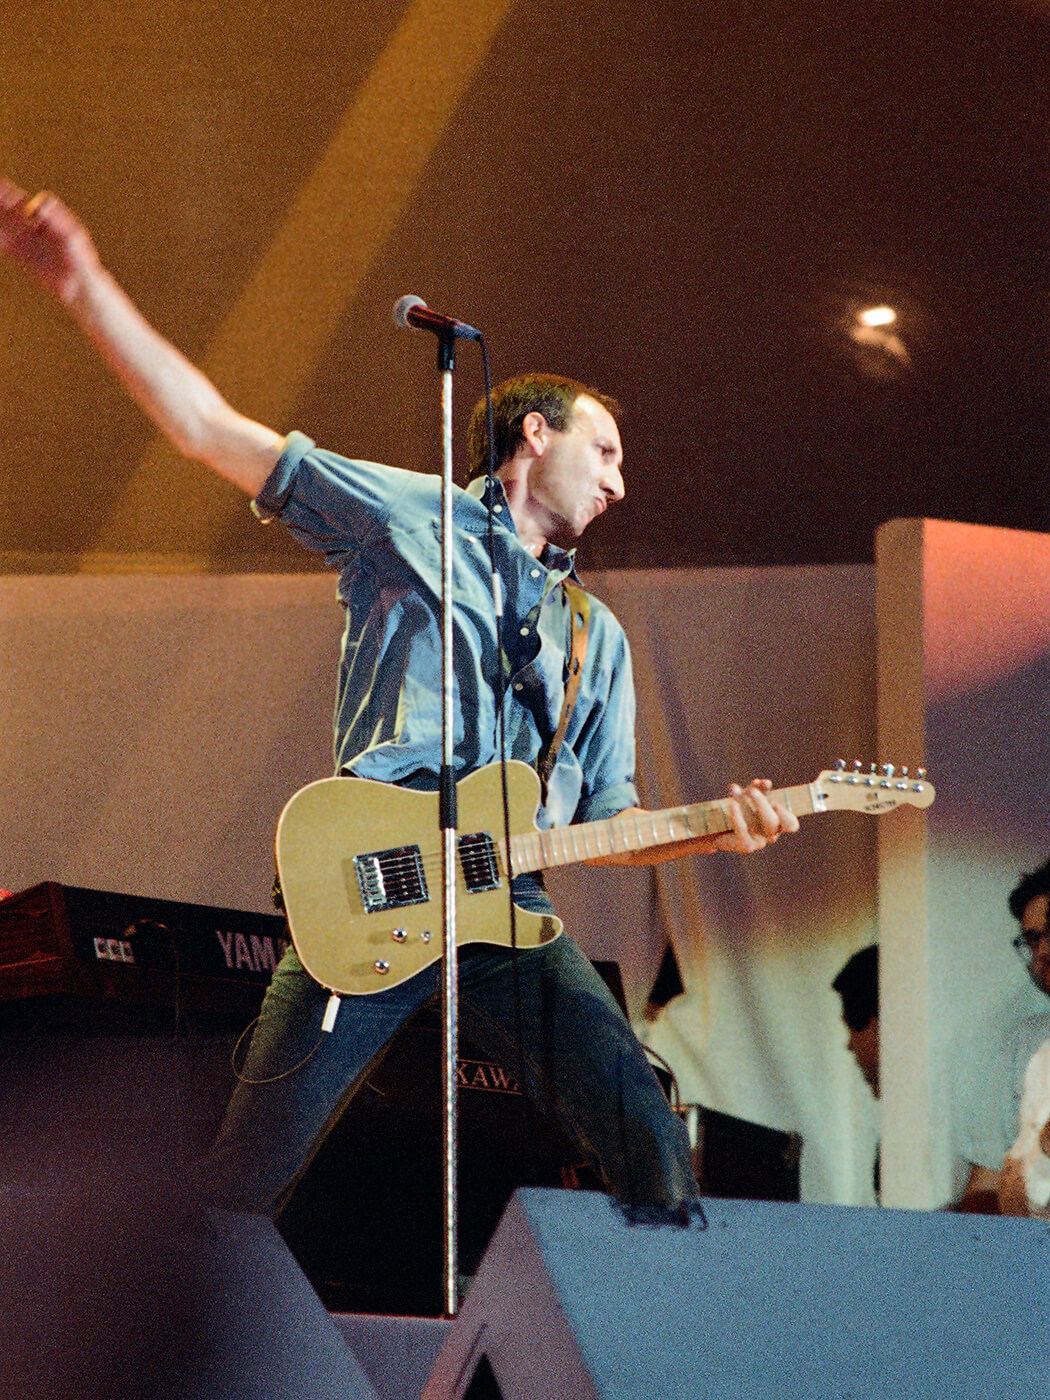 Pete Townshend of The Who performing with a gold Schecter guitar at Live Aid in 1985 by Pete Still/Redferns via Getty Images